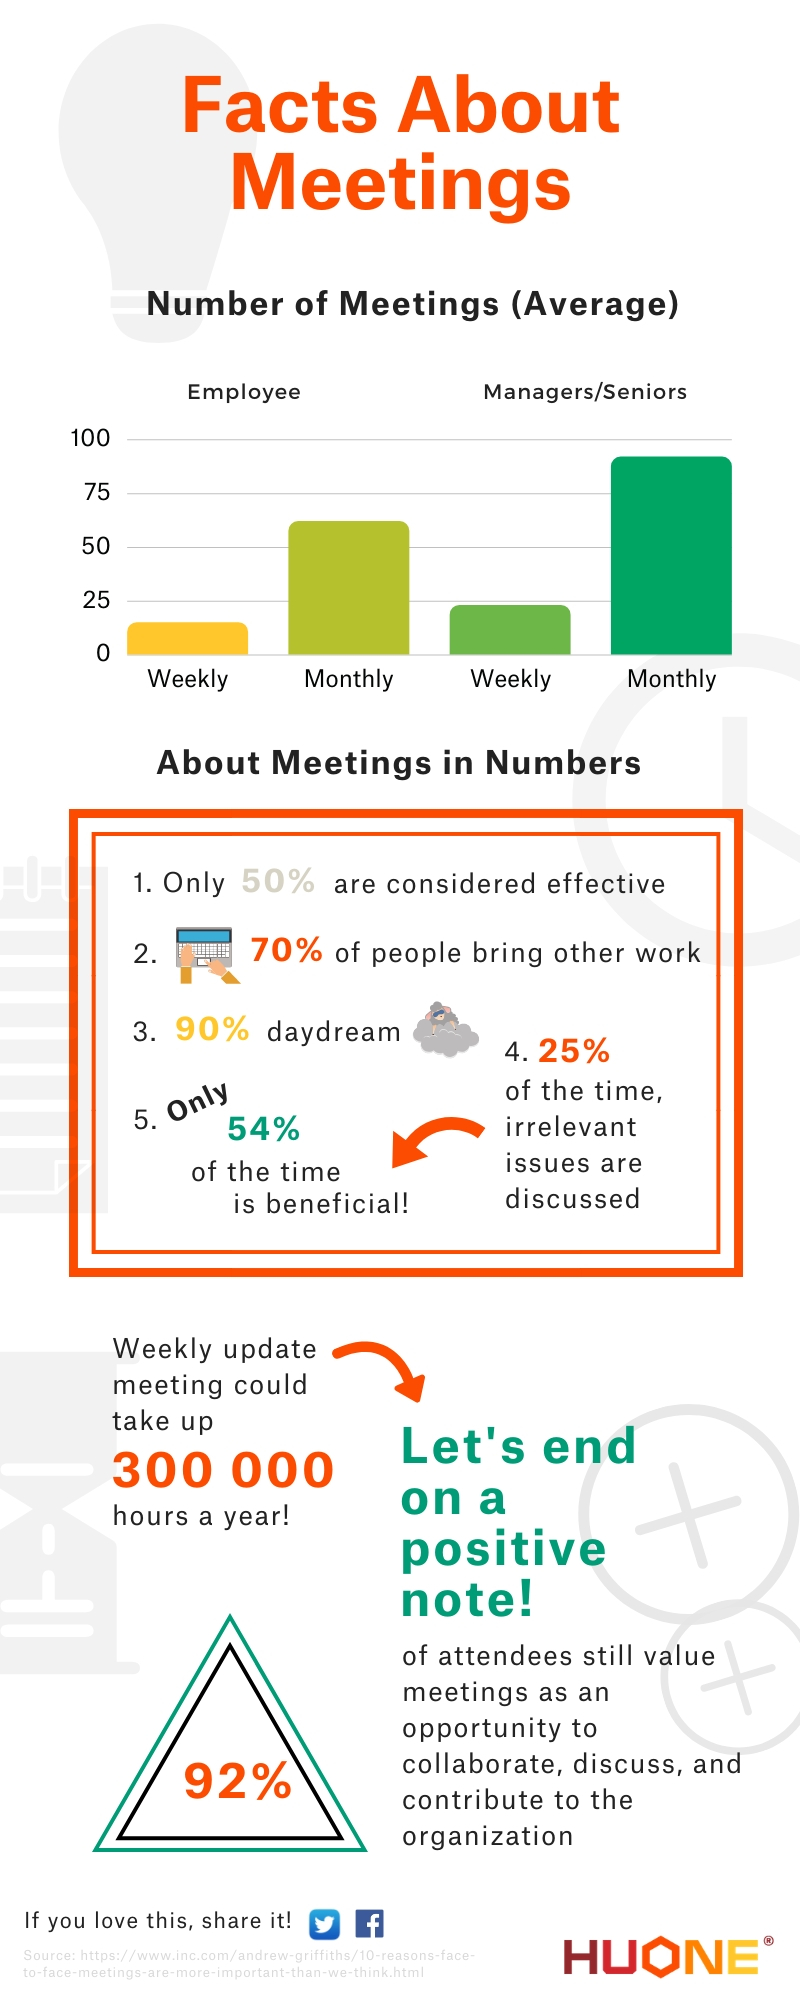 Facts about meetings infographic HUONE